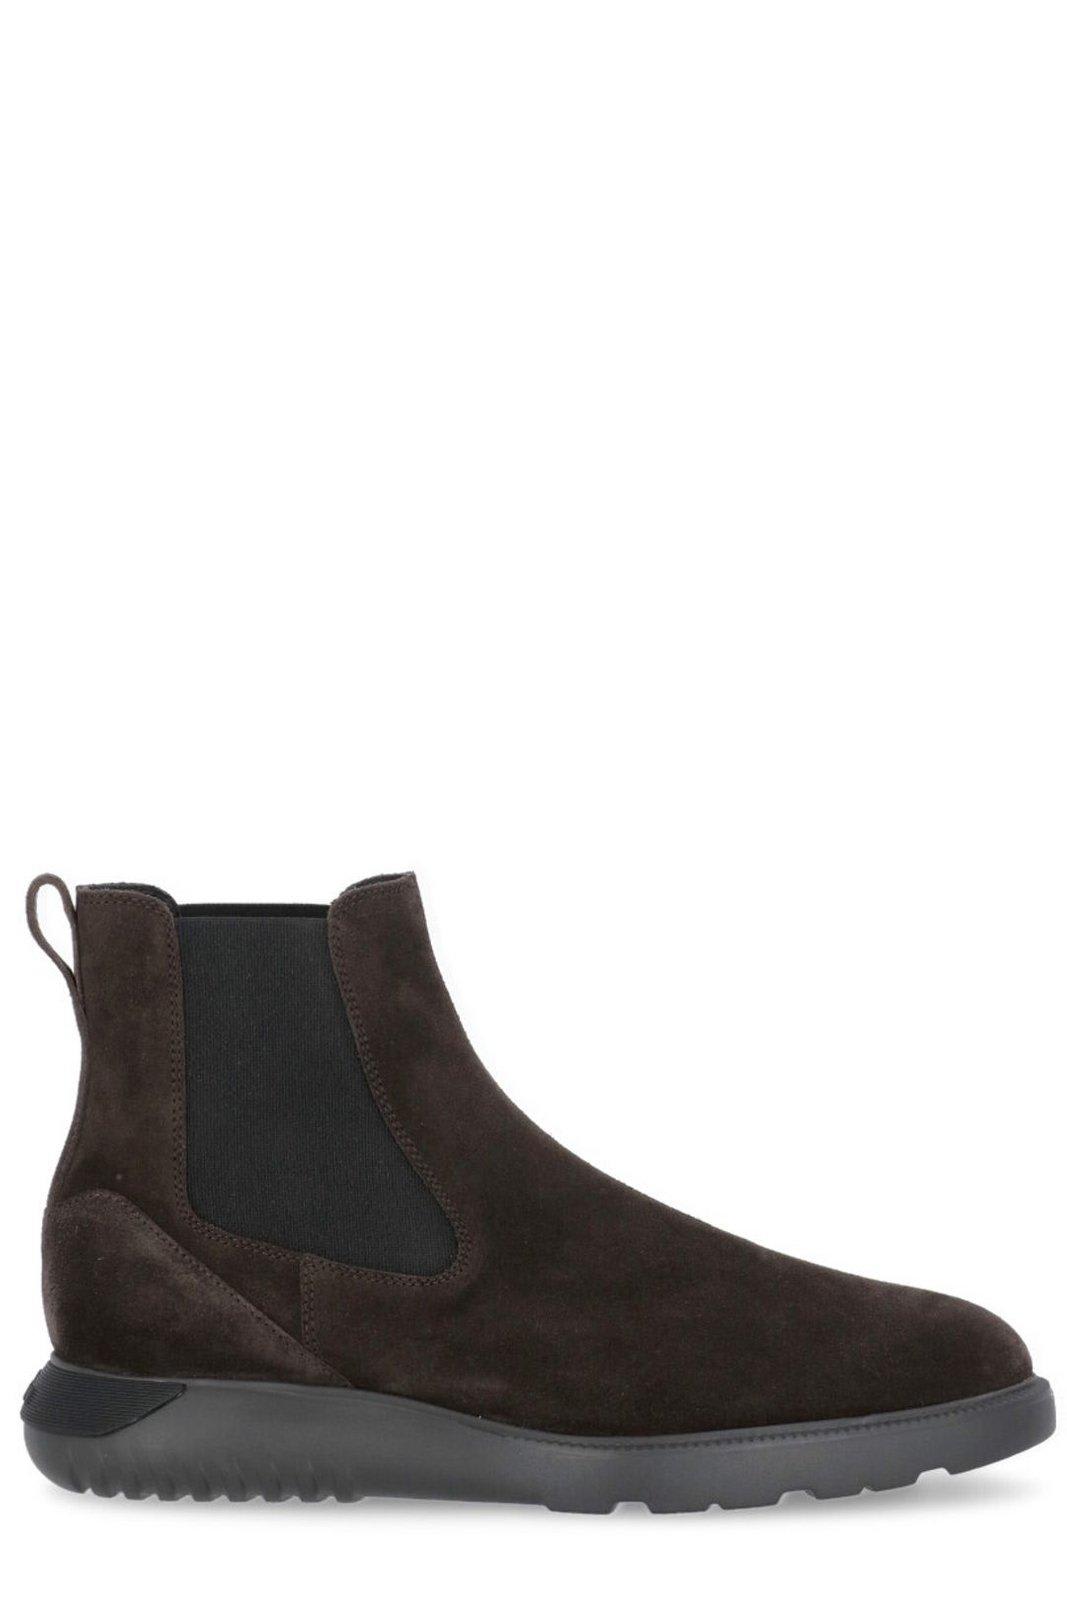 HOGAN ROUND TOE ANKLE BOOTS